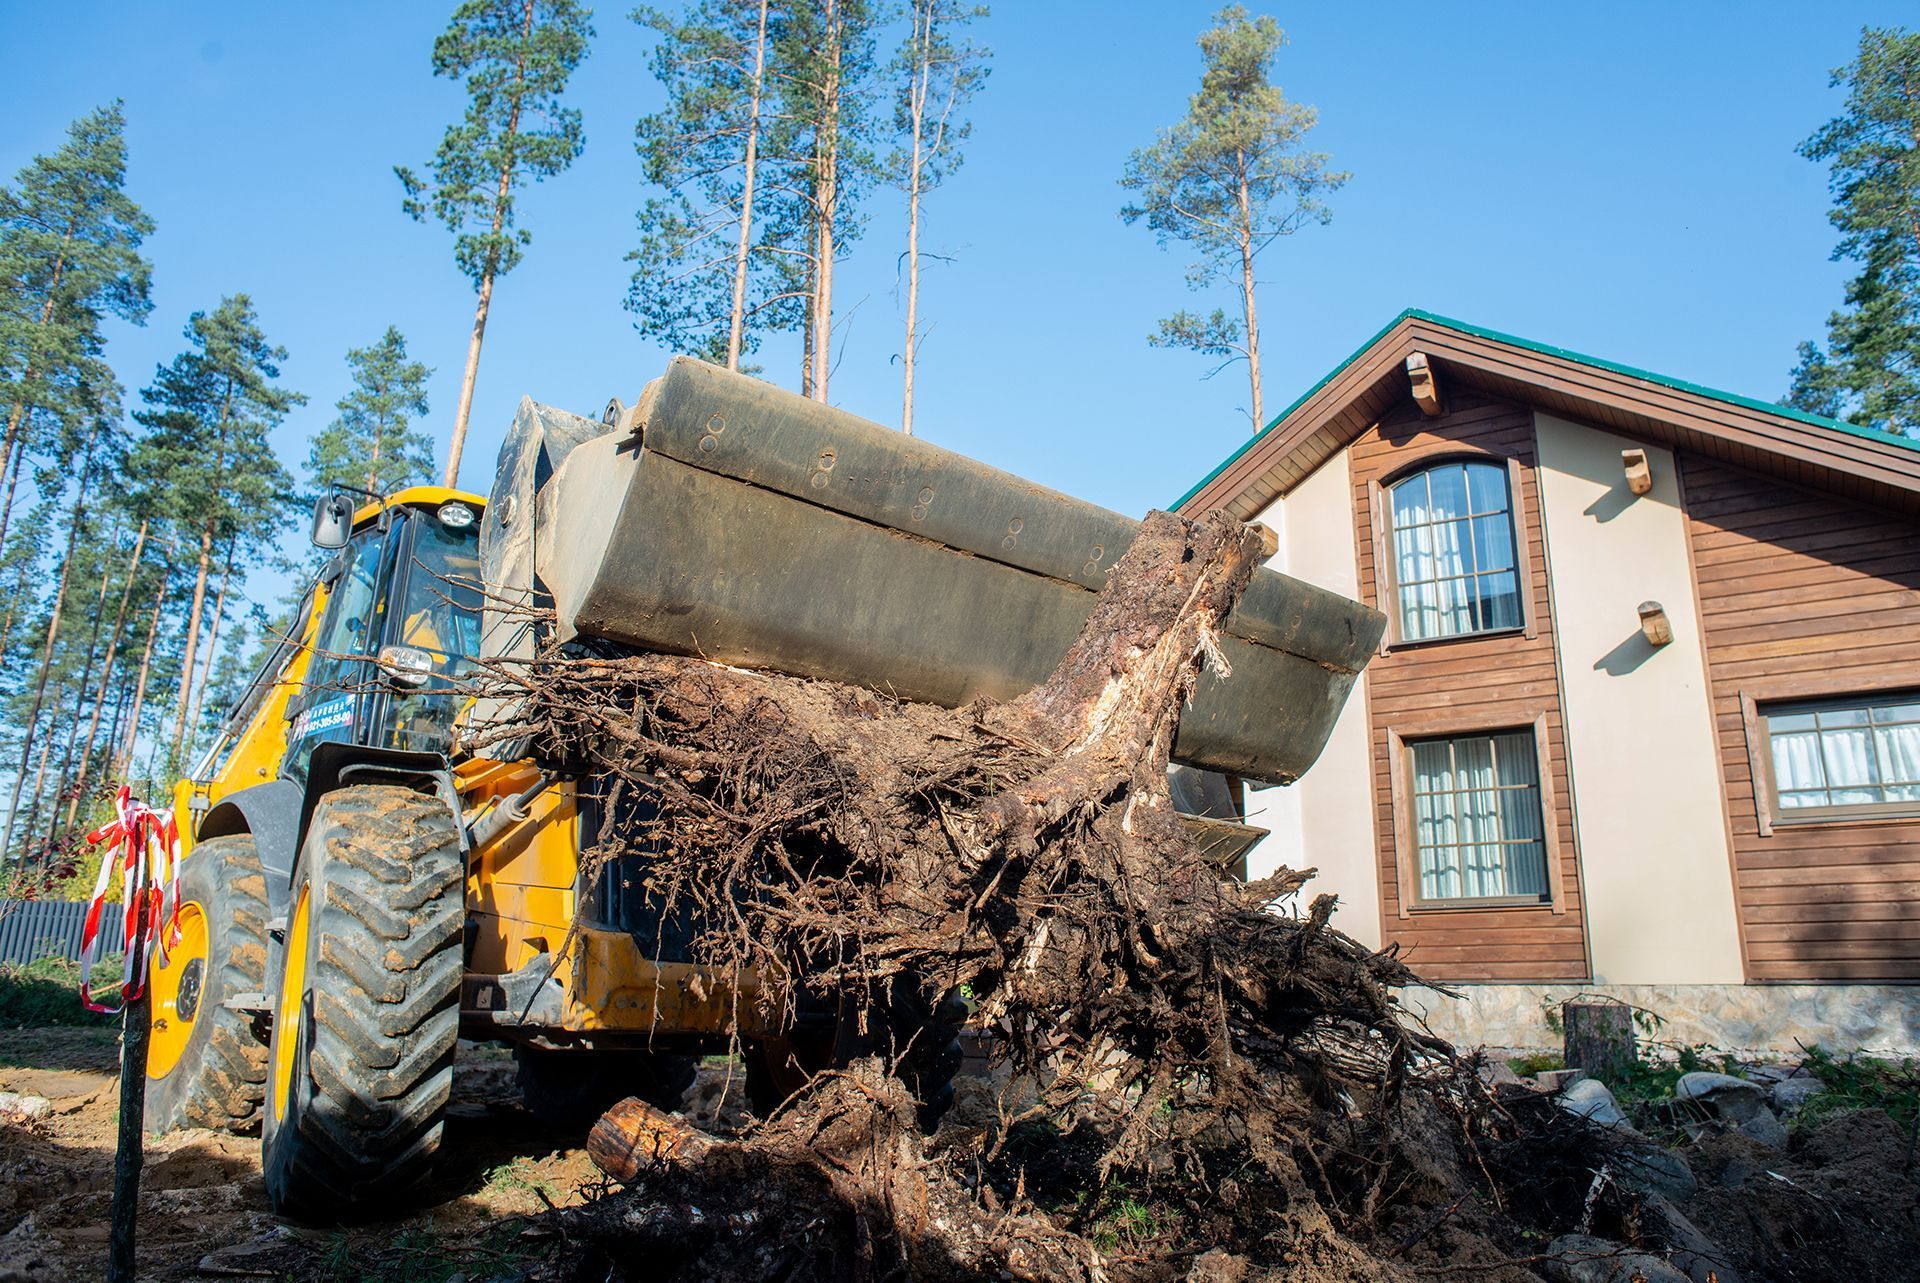 a tractor is carrying a large tree stump in front of a house